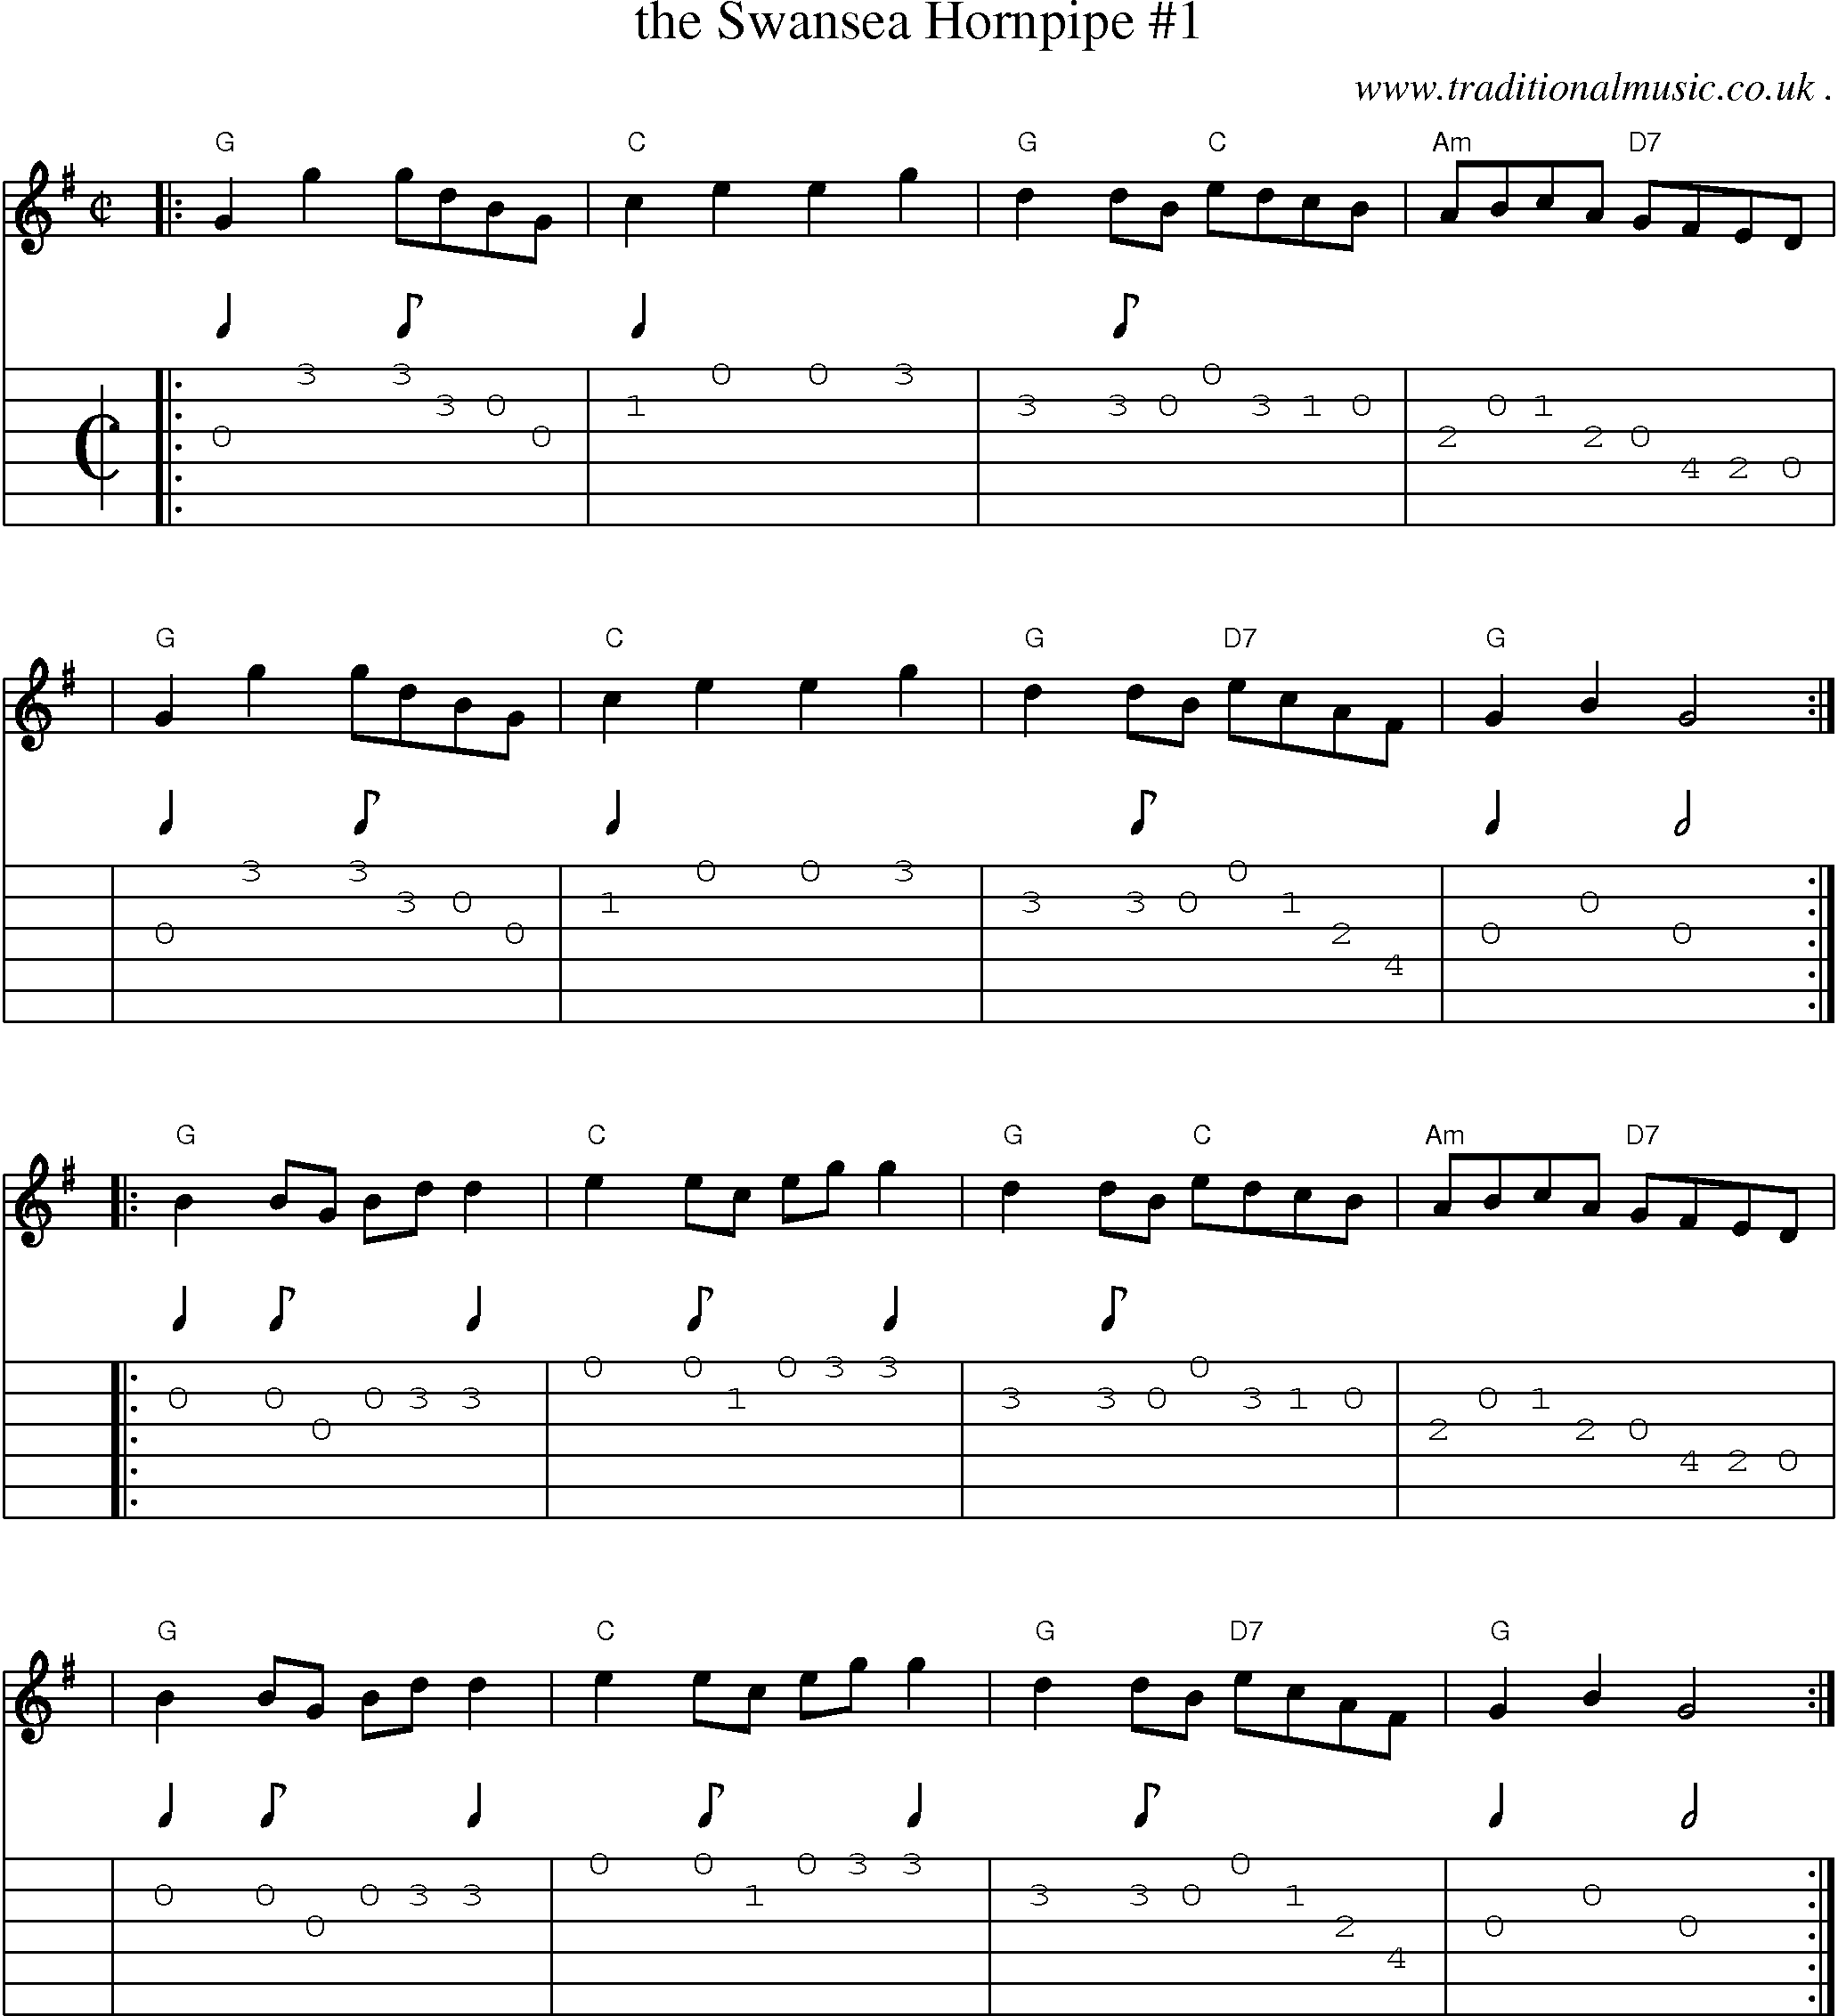 Sheet-music  score, Chords and Guitar Tabs for The Swansea Hornpipe 1